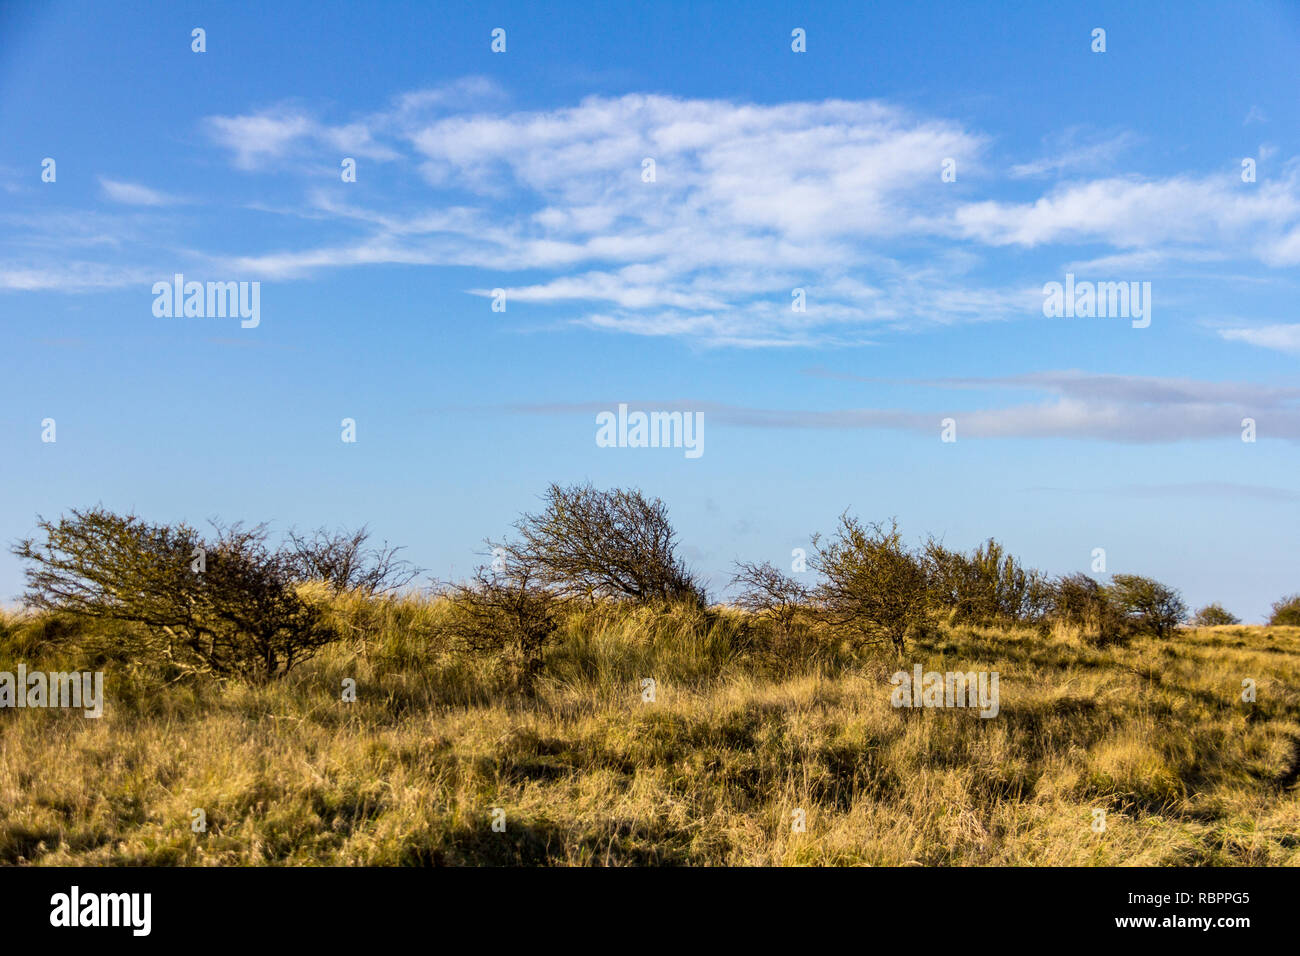 Windswept trees and grass dominate the landscape at Donna Nook Nature Reserve in Lincolnshire, Engand, UK Stock Photo